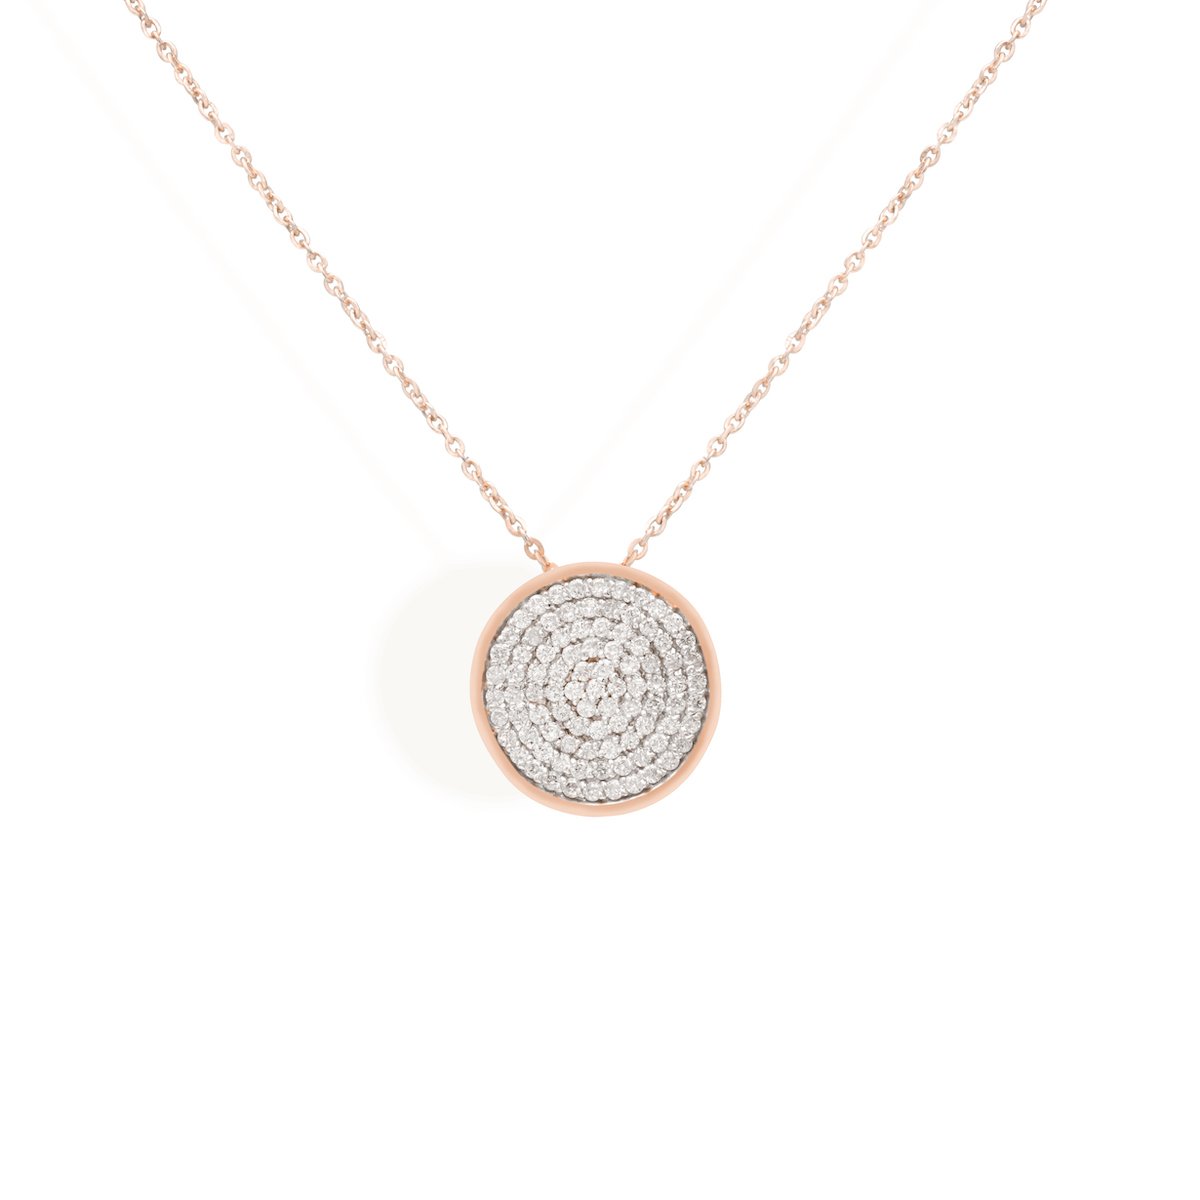 LOOKING GLASS NECKLACE IN ROSE GOLD - Art Urbane